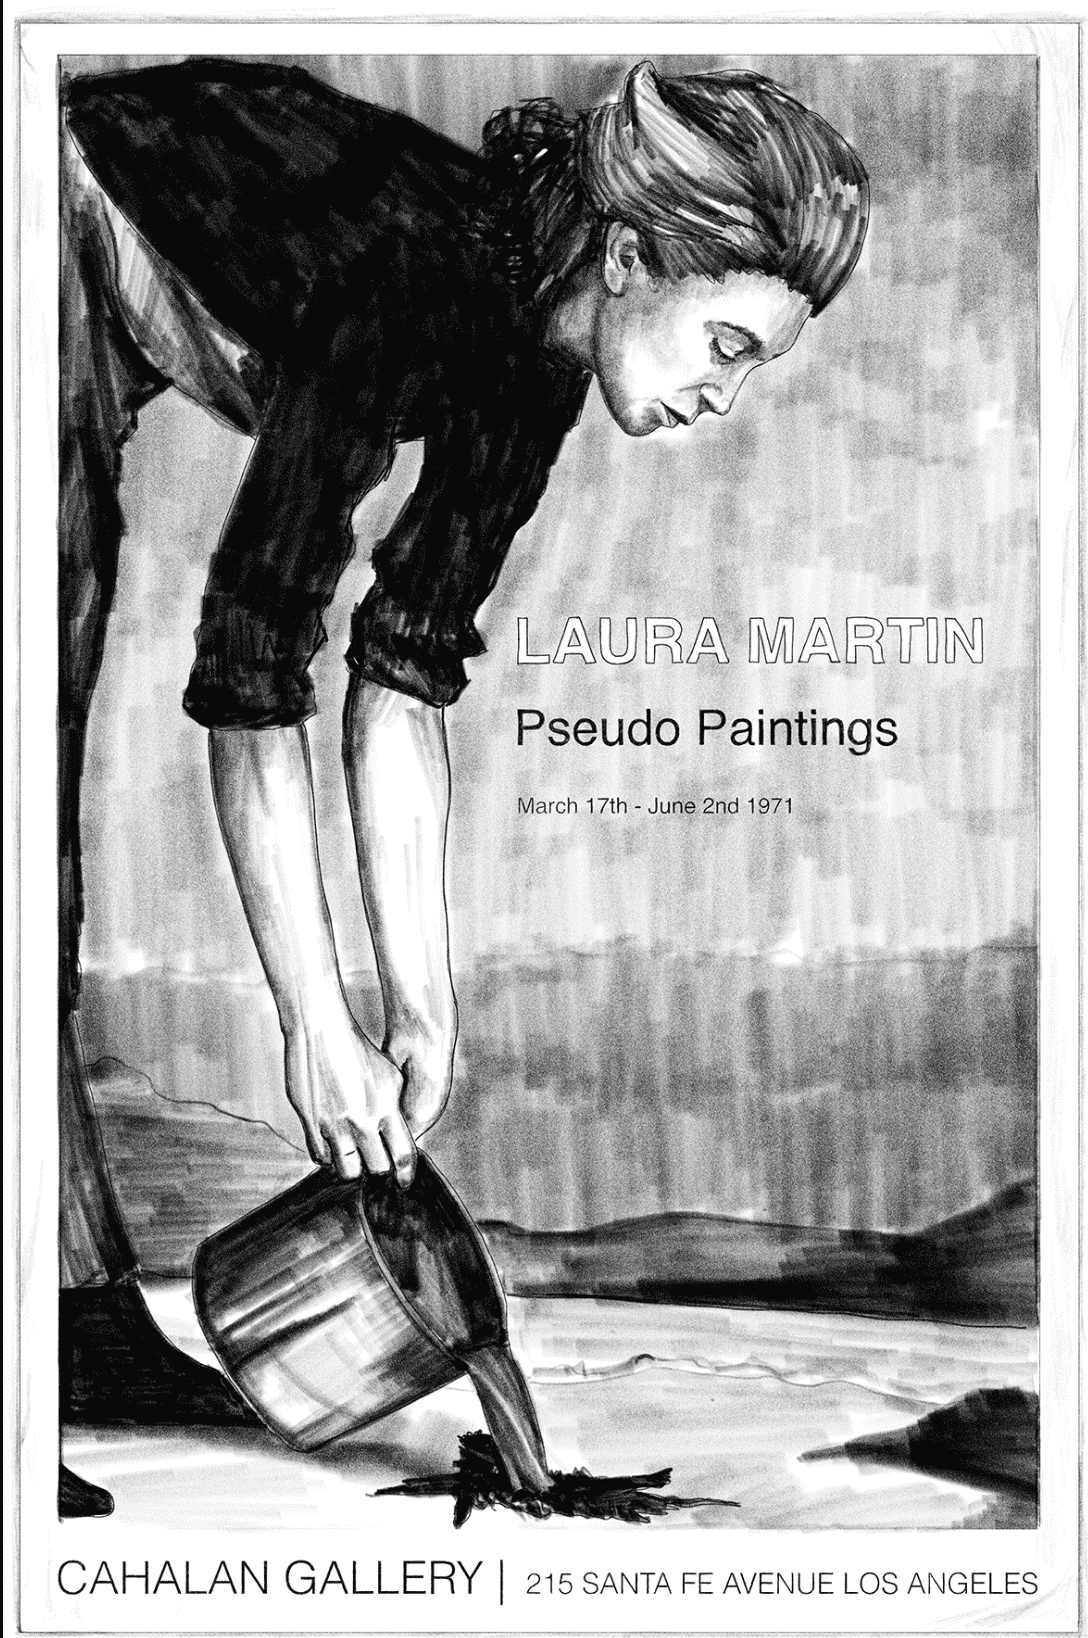 A greyscale painting of a woman pouring a bucket of liquid on the floor